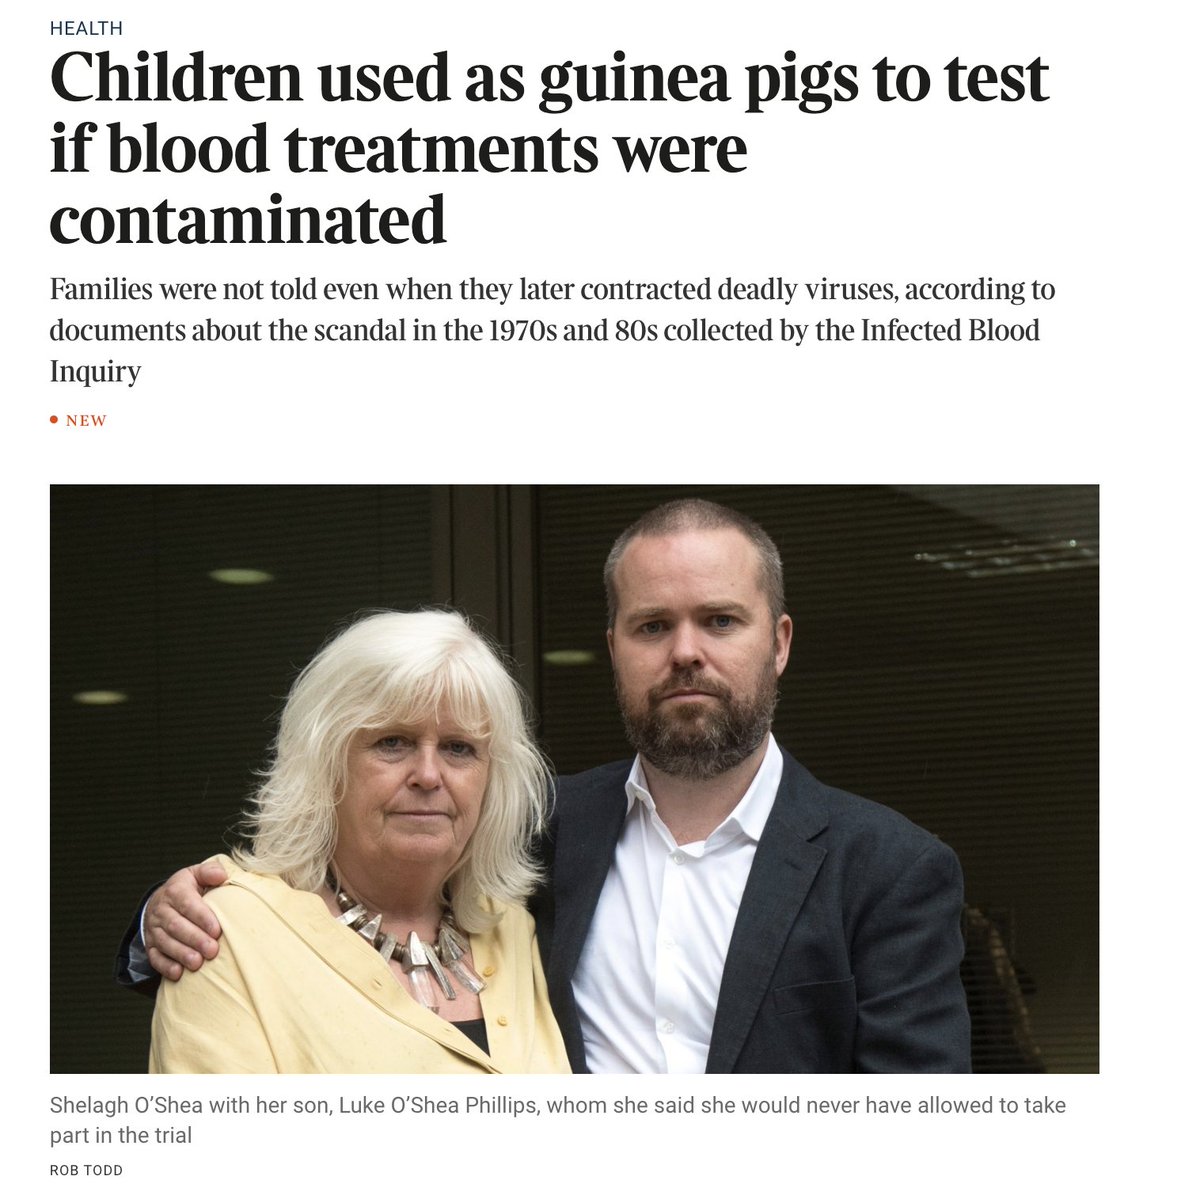 I am so unsurprised. I remember quizzing the transfusion haematologist about blood borne infections in haemophiliacs from infected concentrate when I was a house officer in 1991 and getting a shrug of the shoulders, as if to say 'What can you do?' thetimes.co.uk/article/childr…